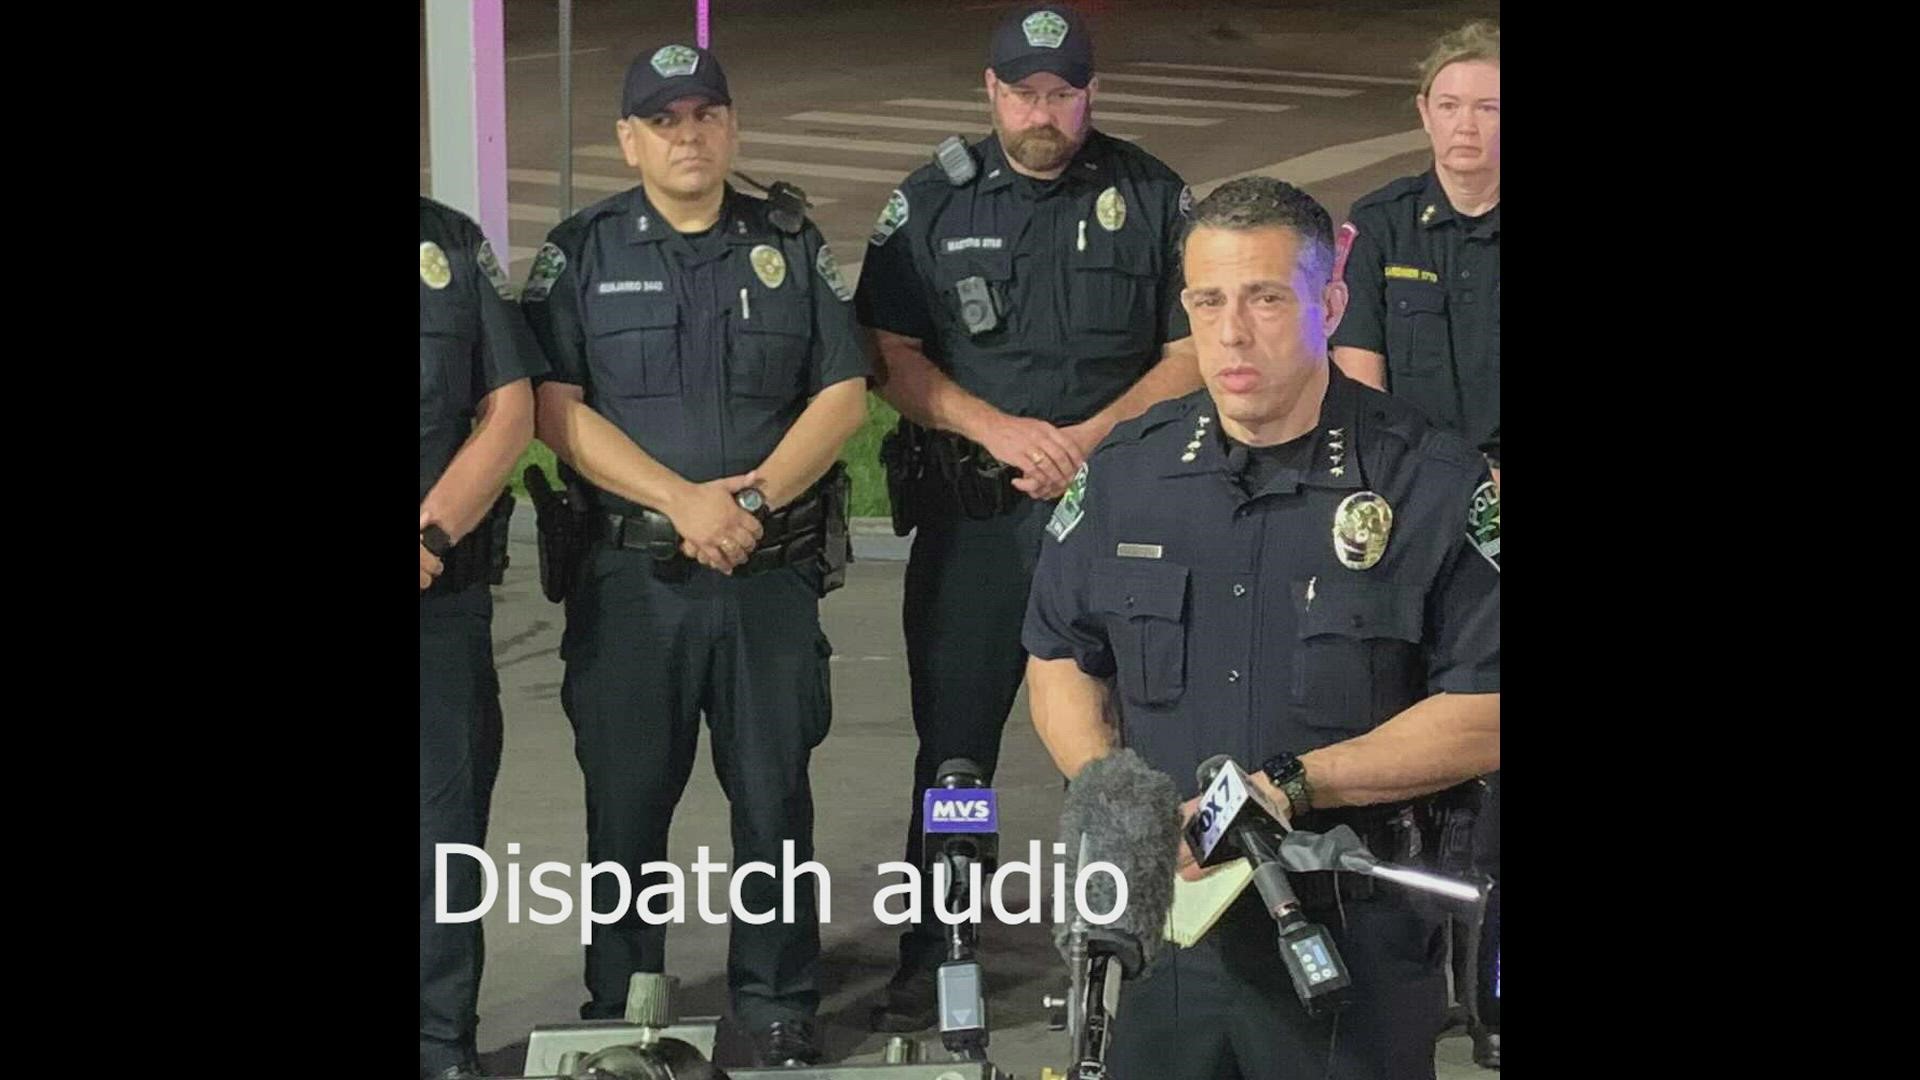 Dispatch audio gives insight into a chaotic scene in Downtown Austin on Sixth Street.